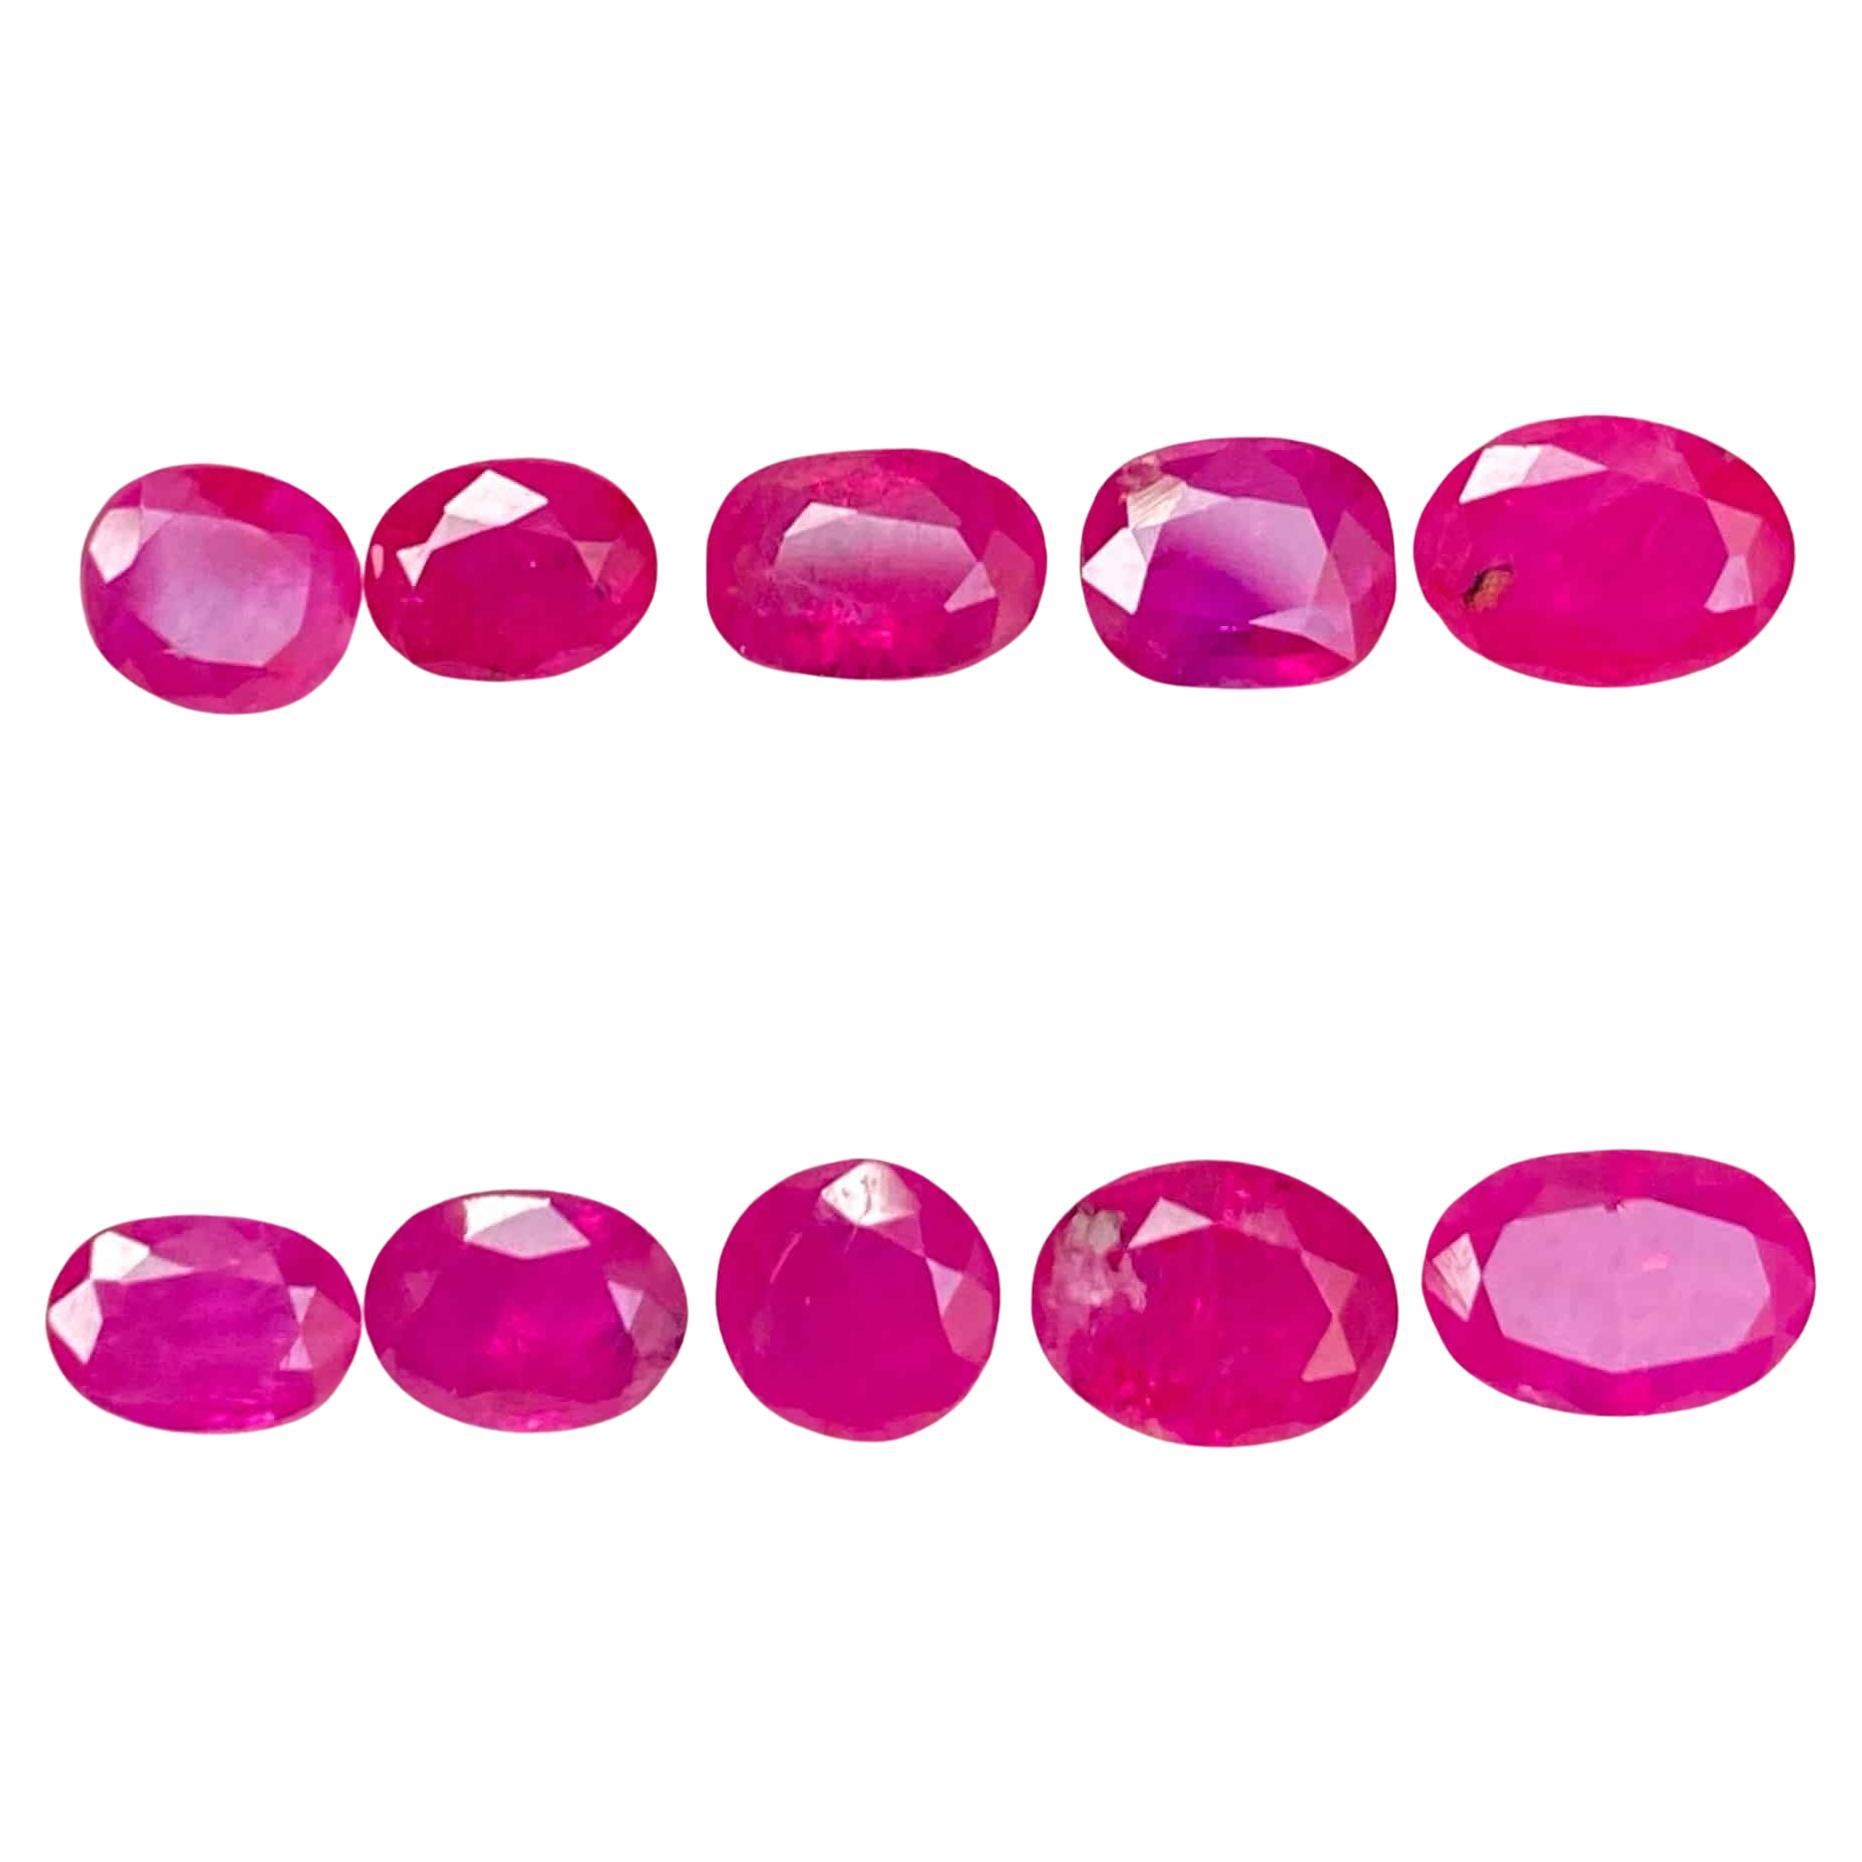 6.60 Carats Faceted Loose Pink Rubies Stones Natural Gemstones From Afghanistan For Sale